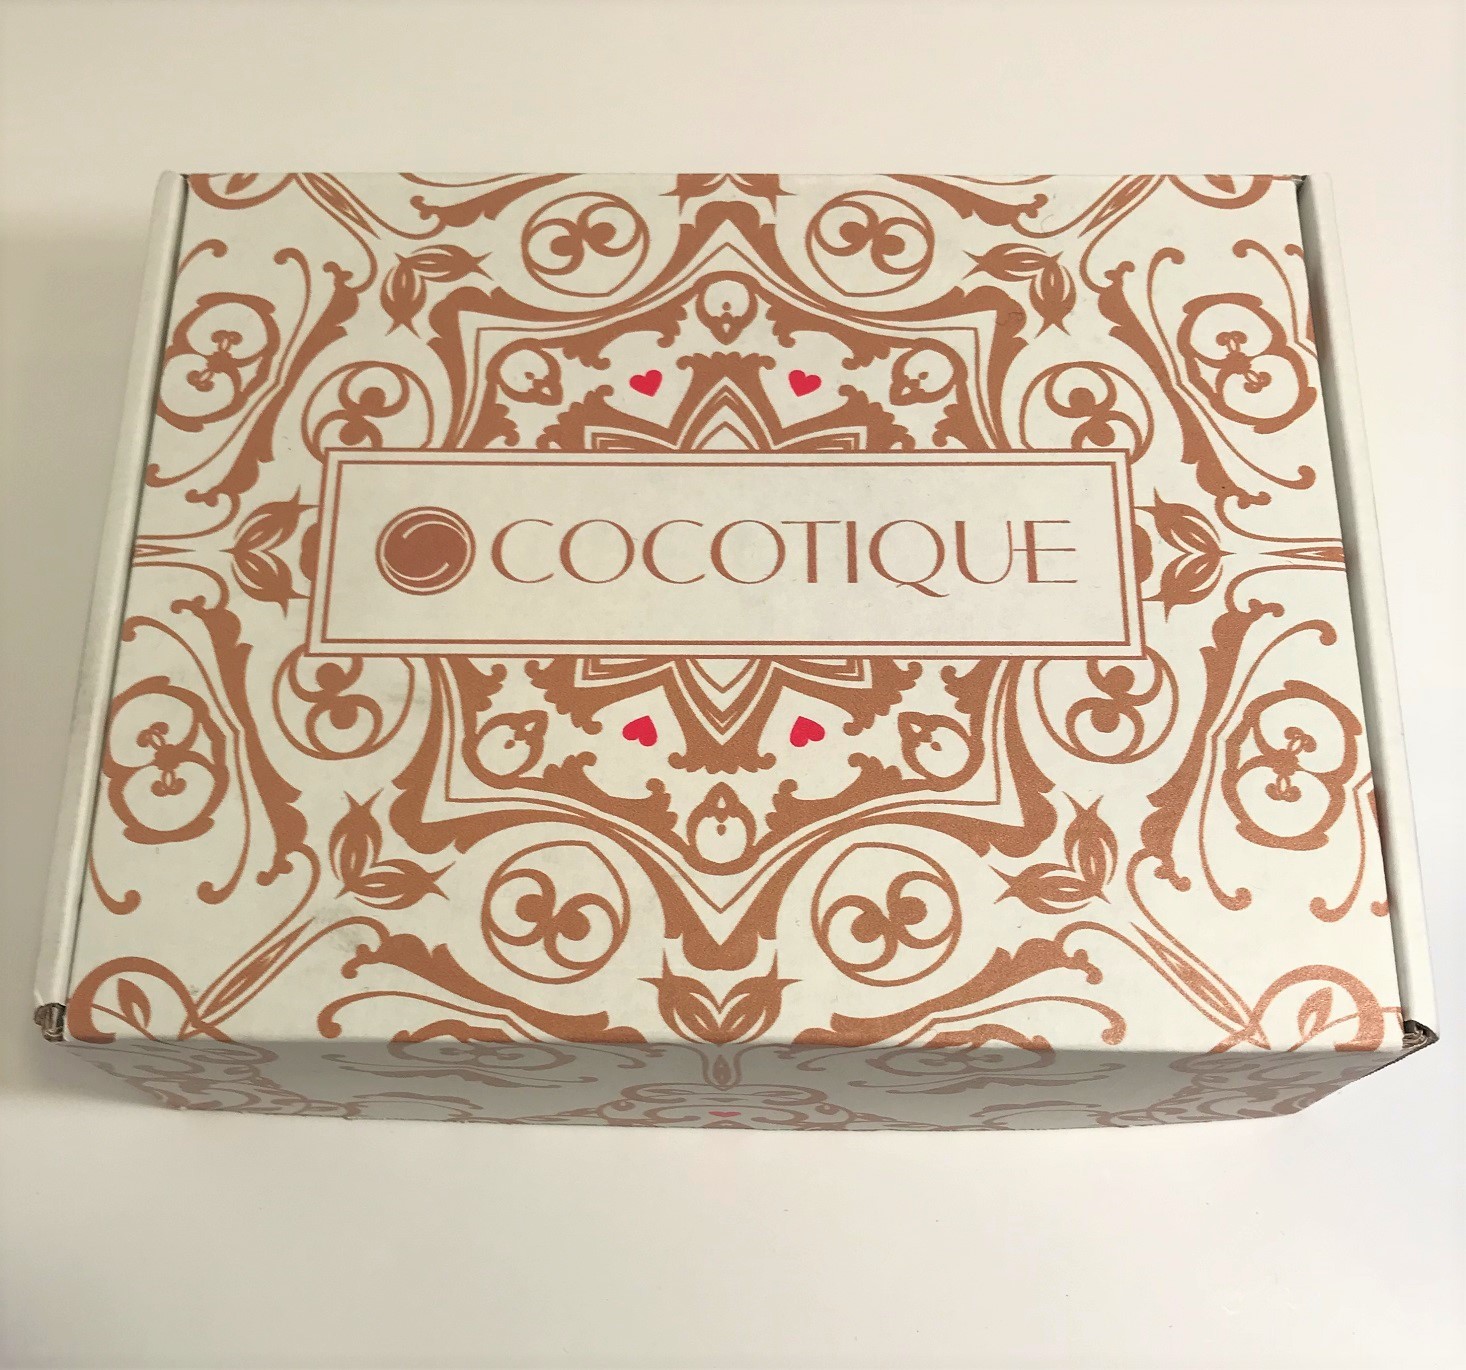 Cocotique “Reshma Beauty Fall Favorites” Review + Coupon – November 2018